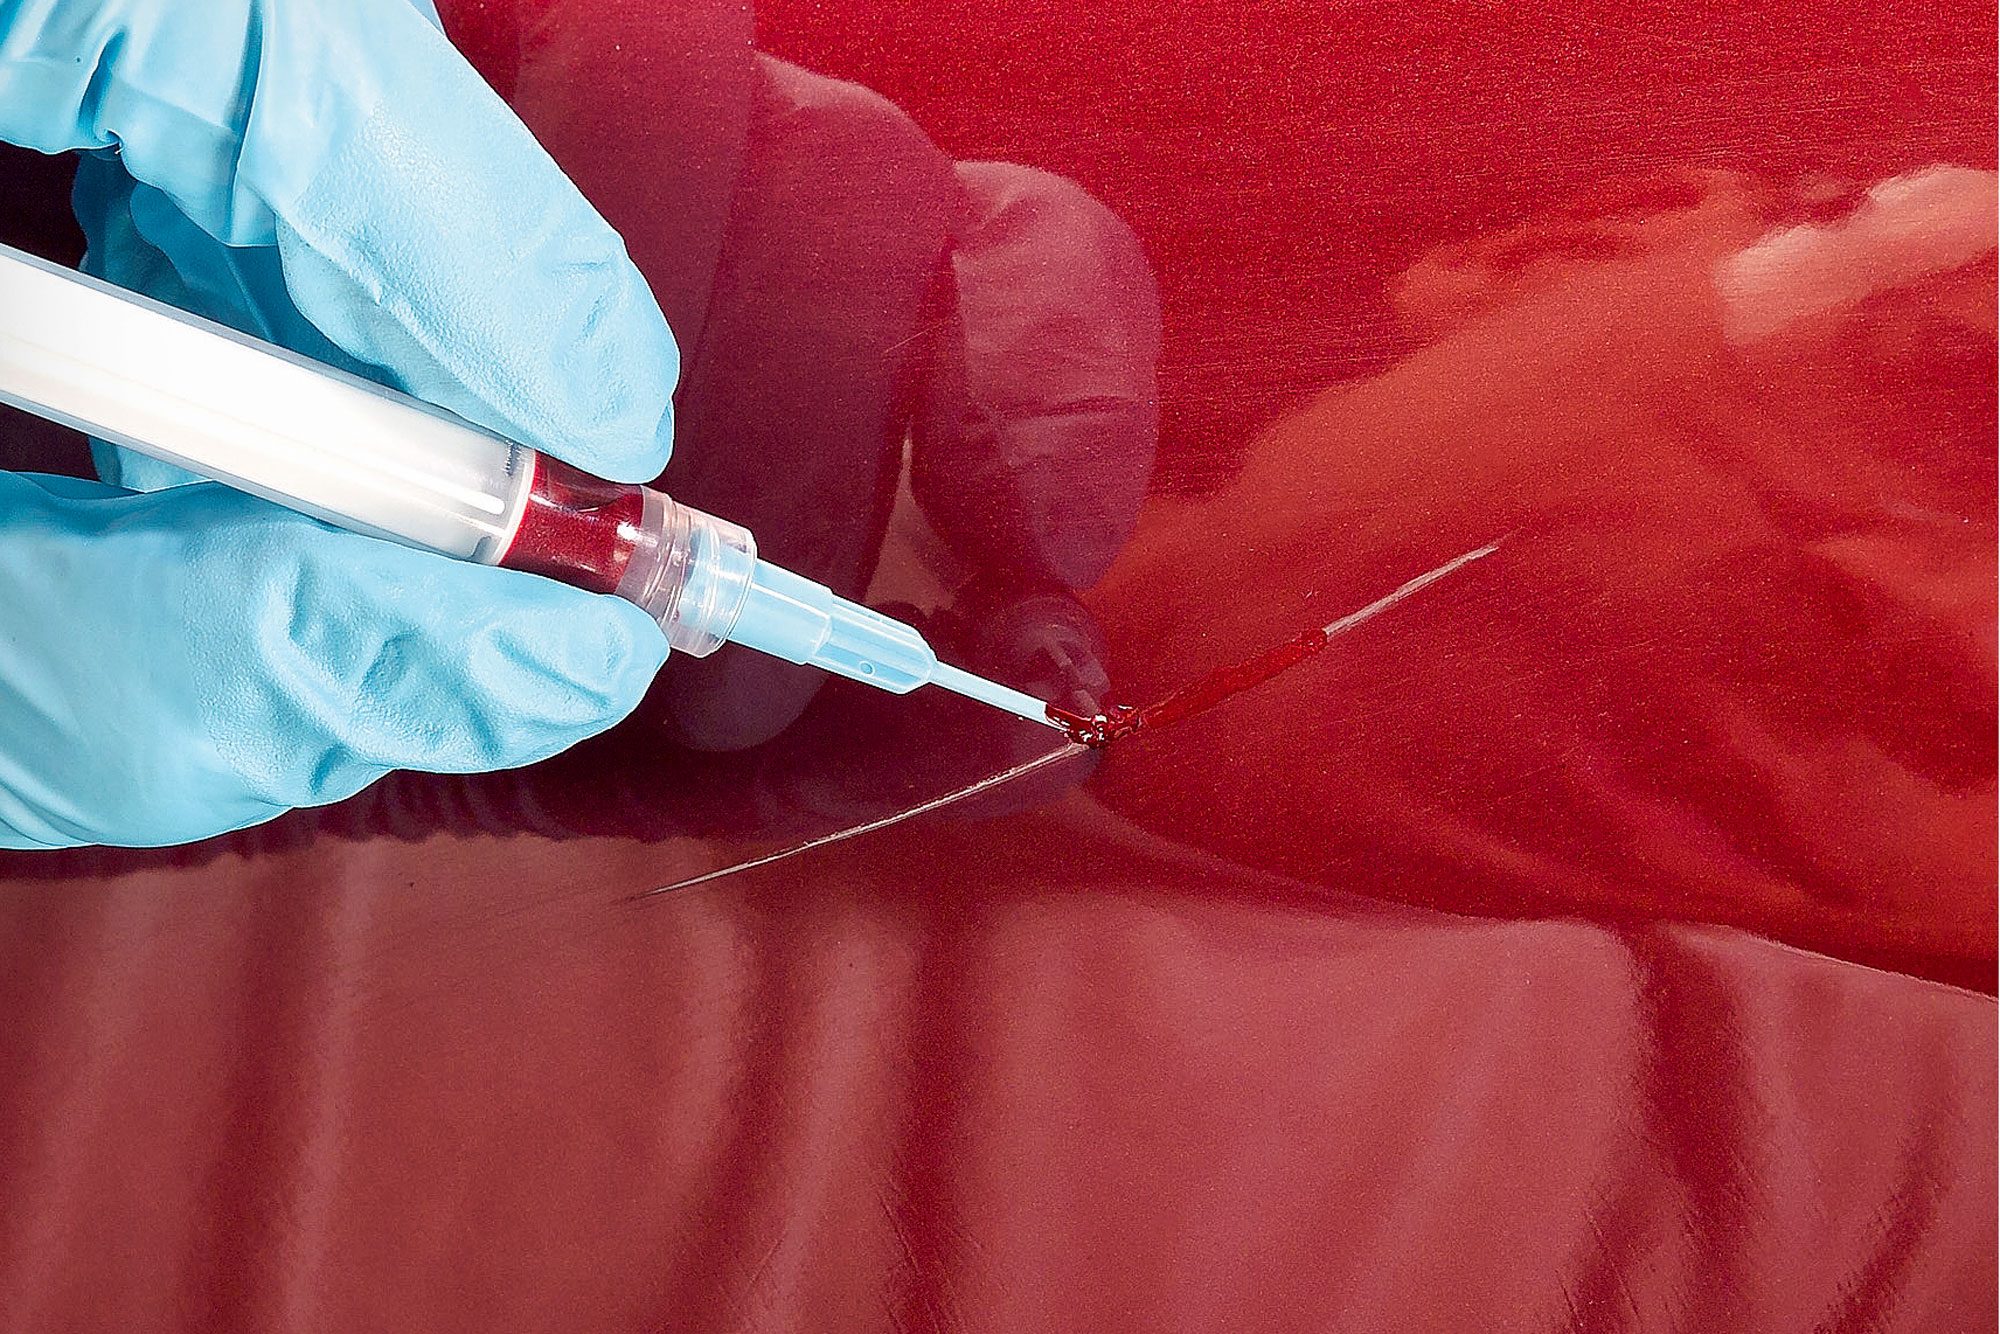 Applying Paint on Scratches with Syringe